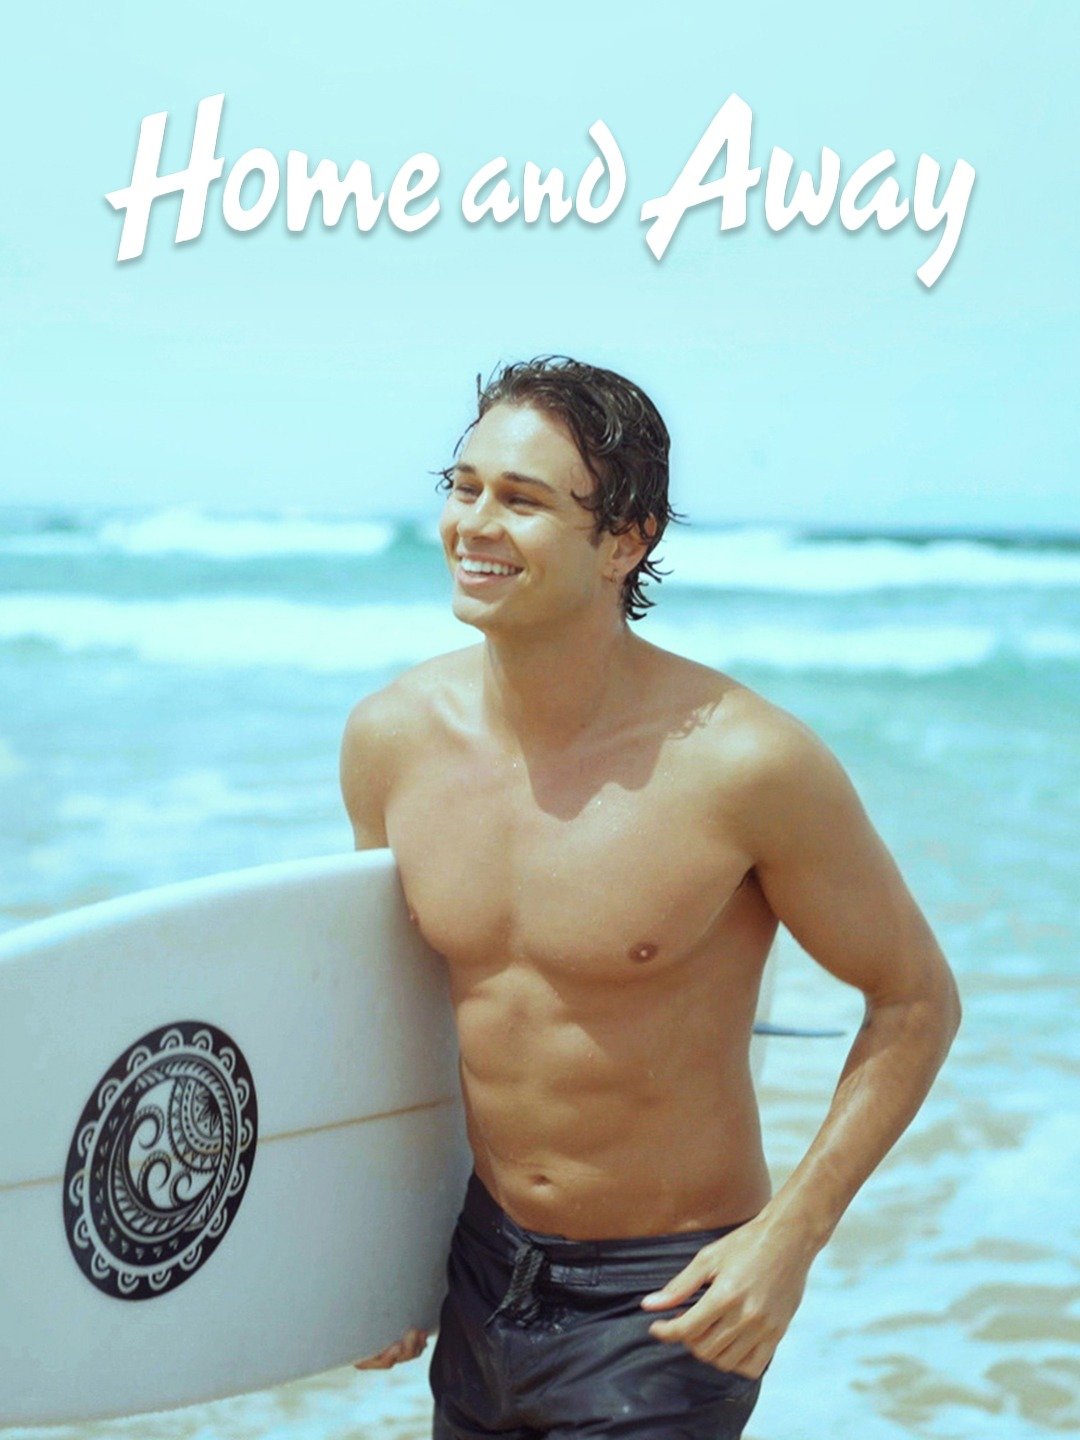 Home and Away: Season 2, Episode 1 - Rotten Tomatoes